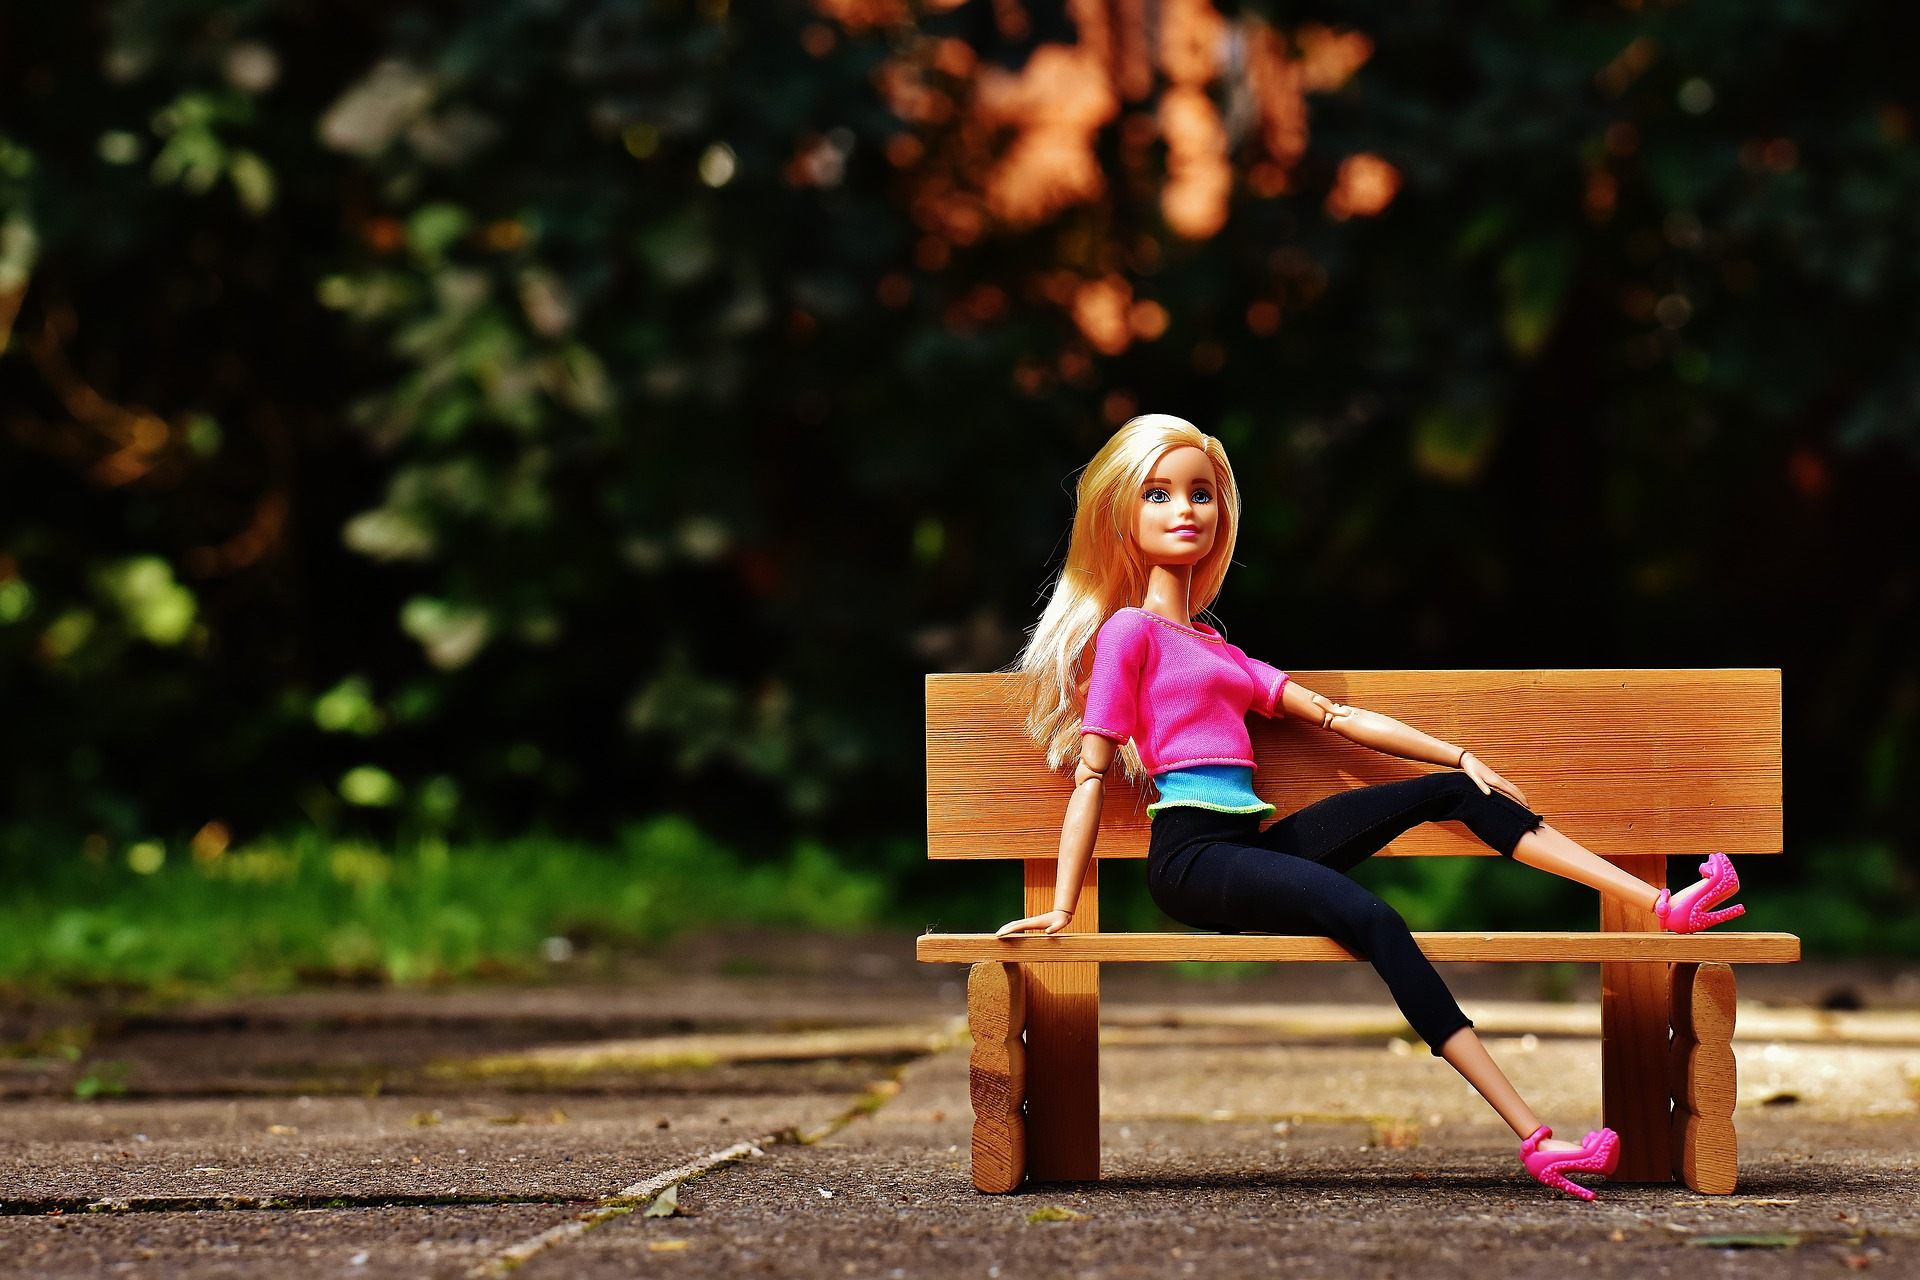 Awesome Barbie Doll Hd Wallpaper 1920x1280p - Barbie Girl In Nature , HD Wallpaper & Backgrounds